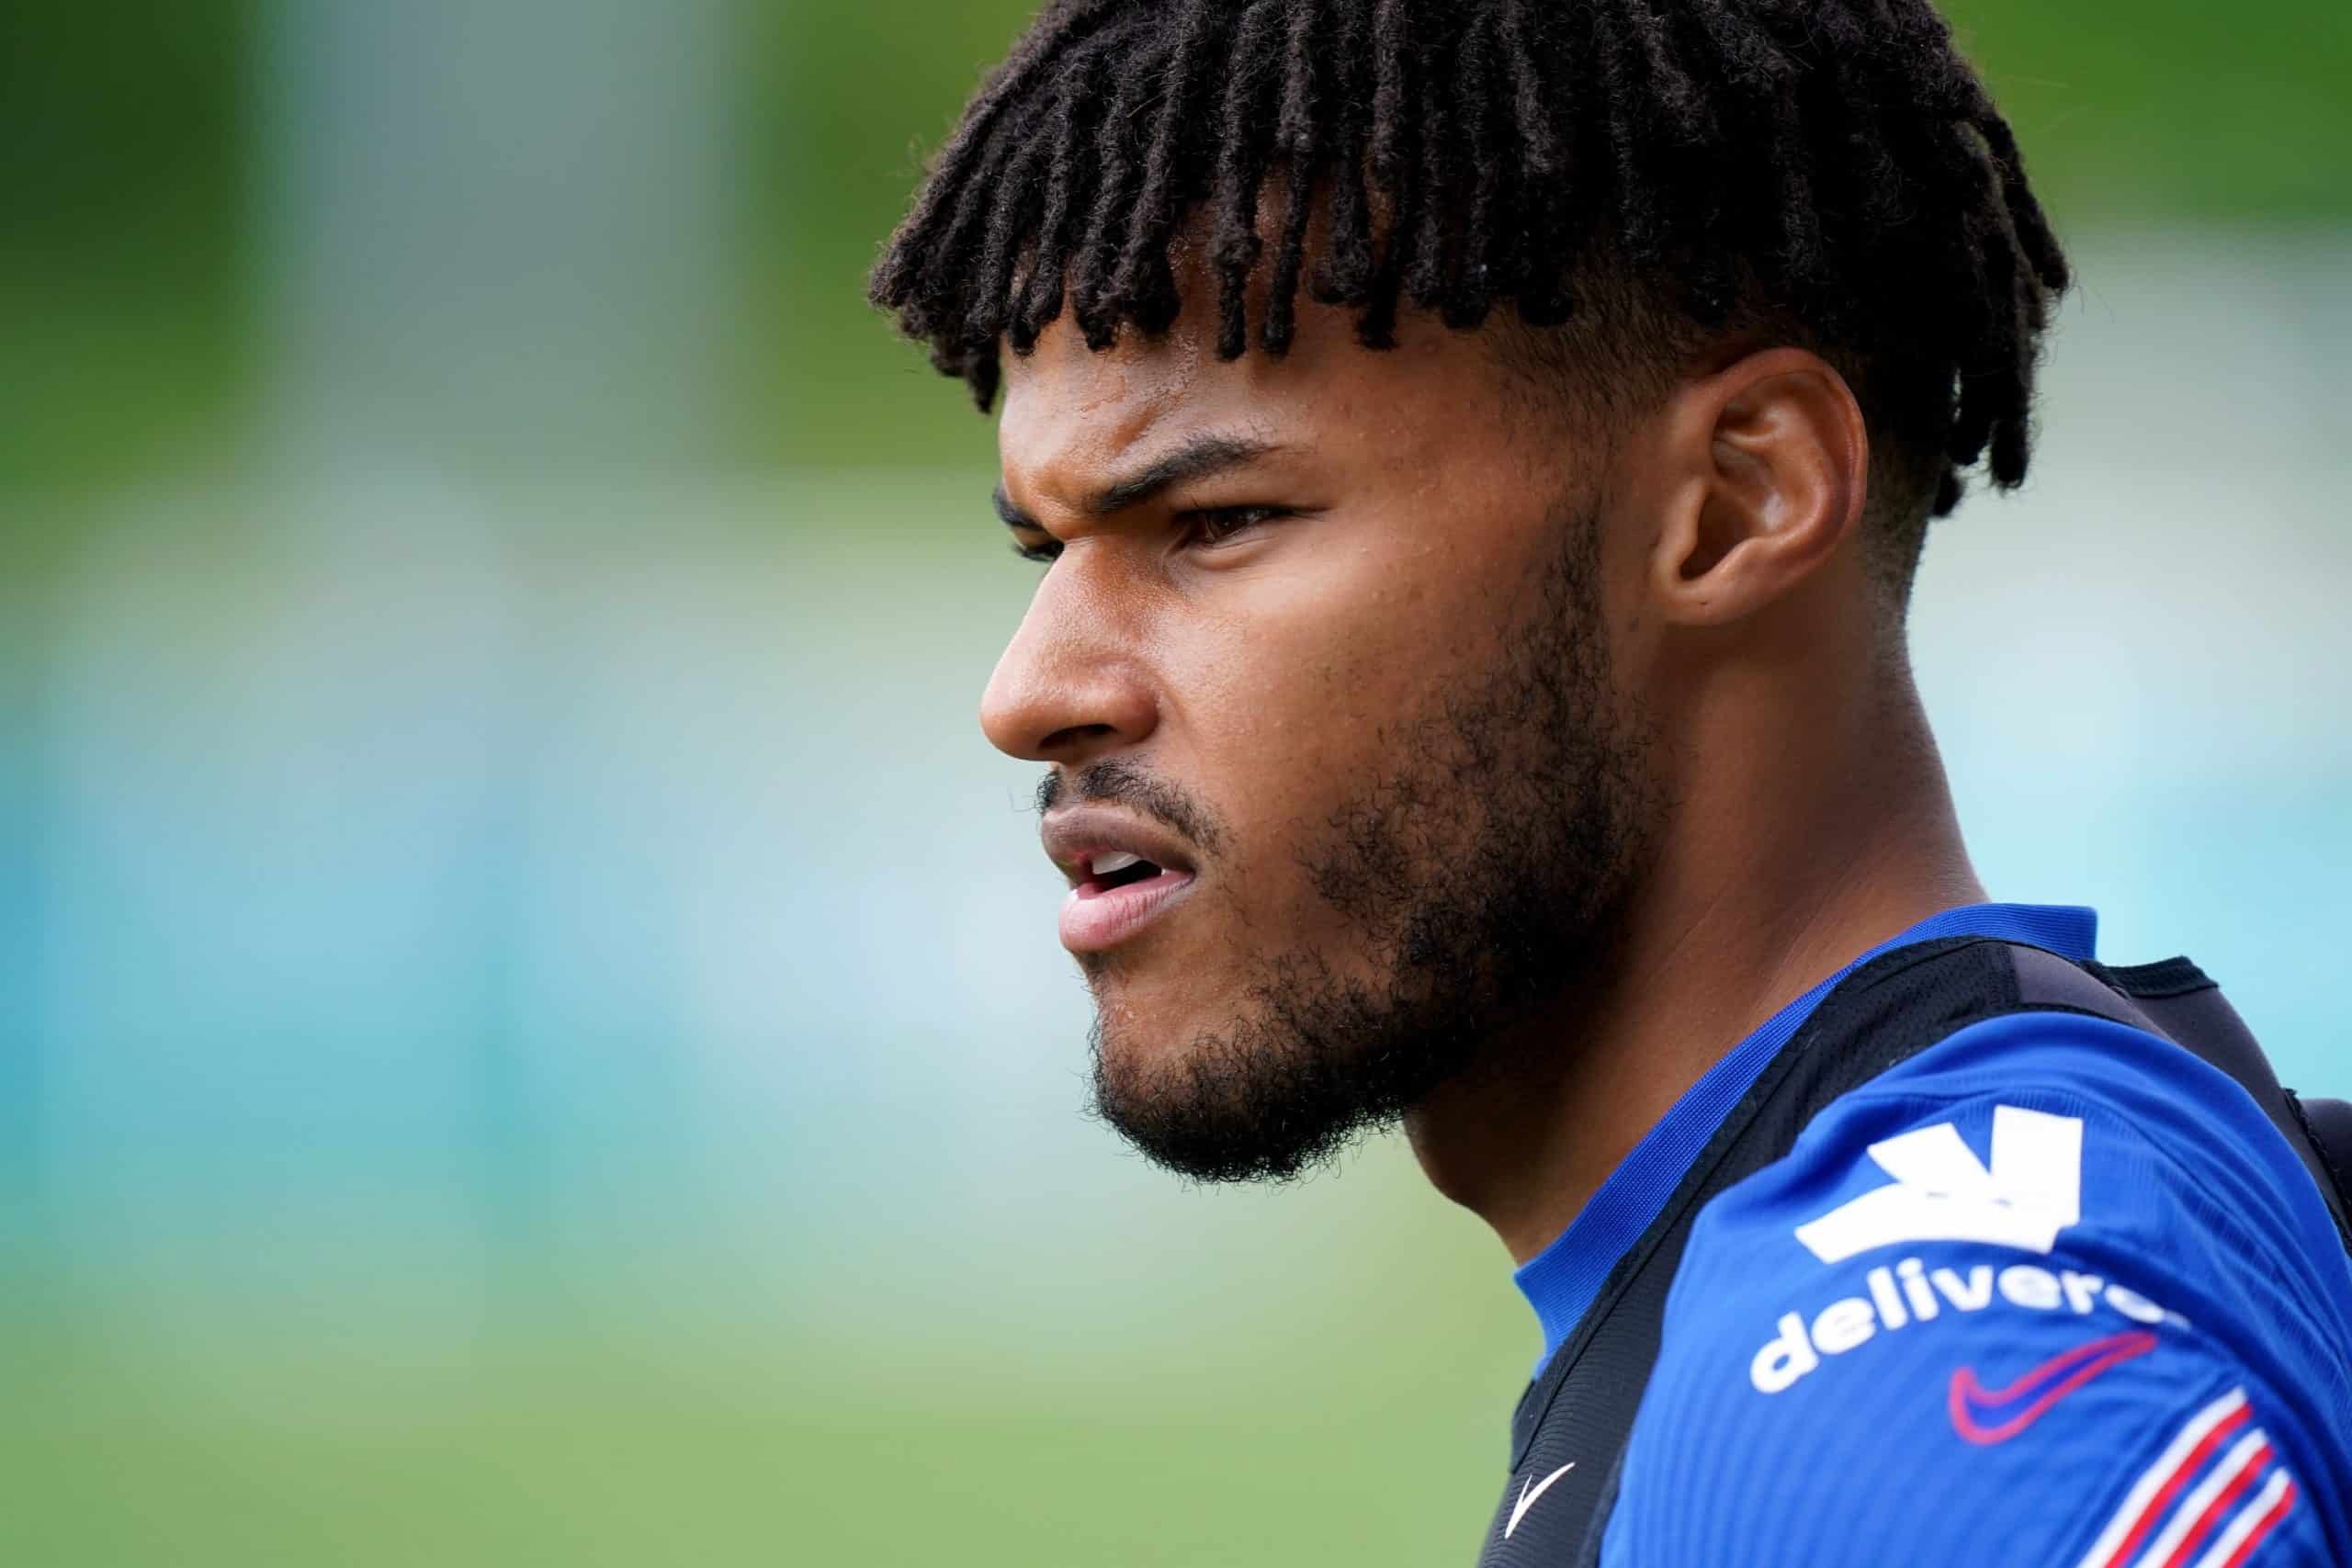 Tyrone Mings: England star, homelessness campaigner, anti-racism leader